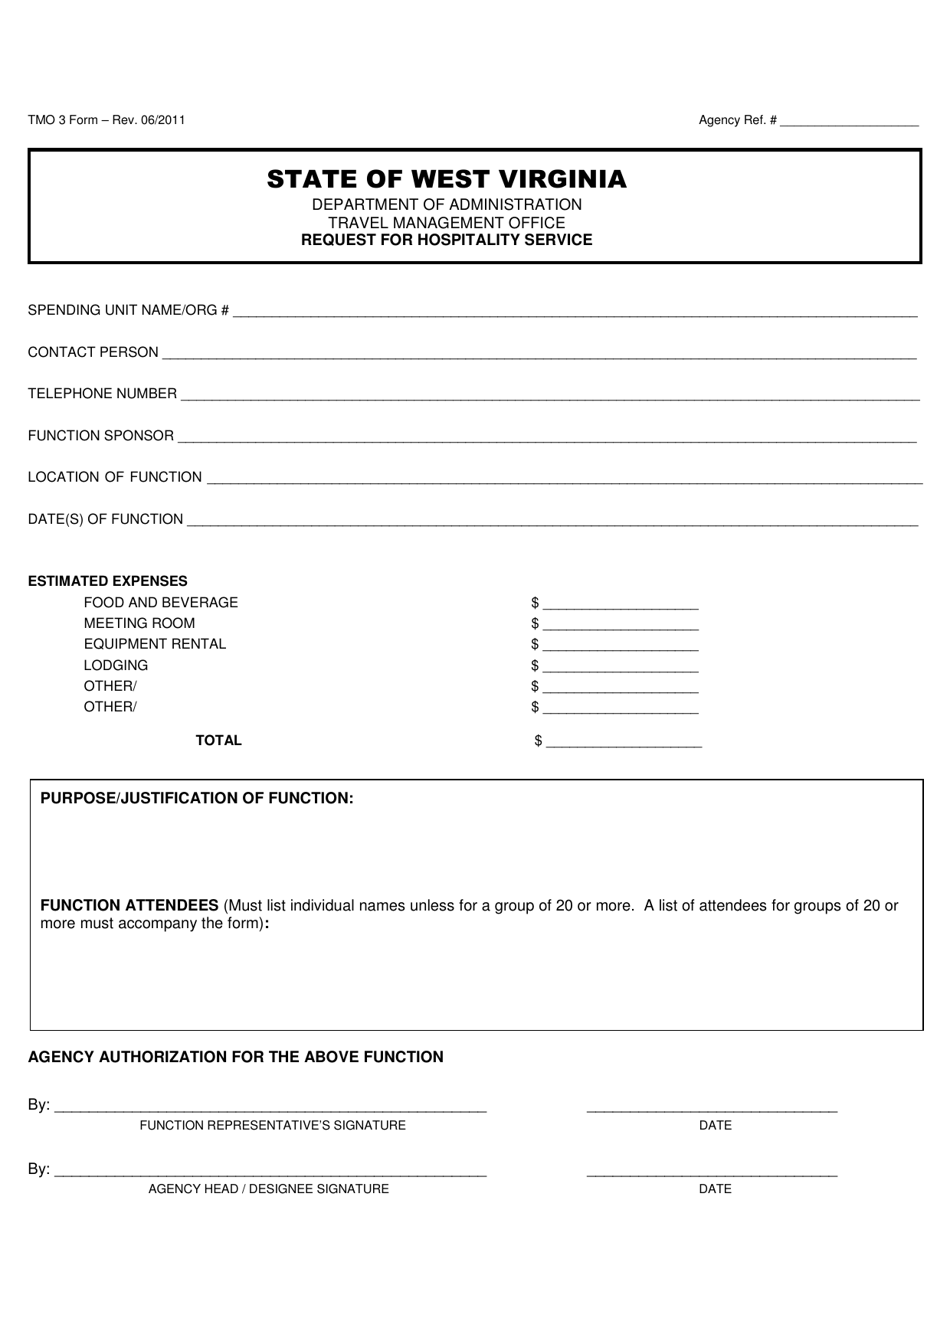 Form TMO3 Request for Hospitality Service - West Virginia, Page 1